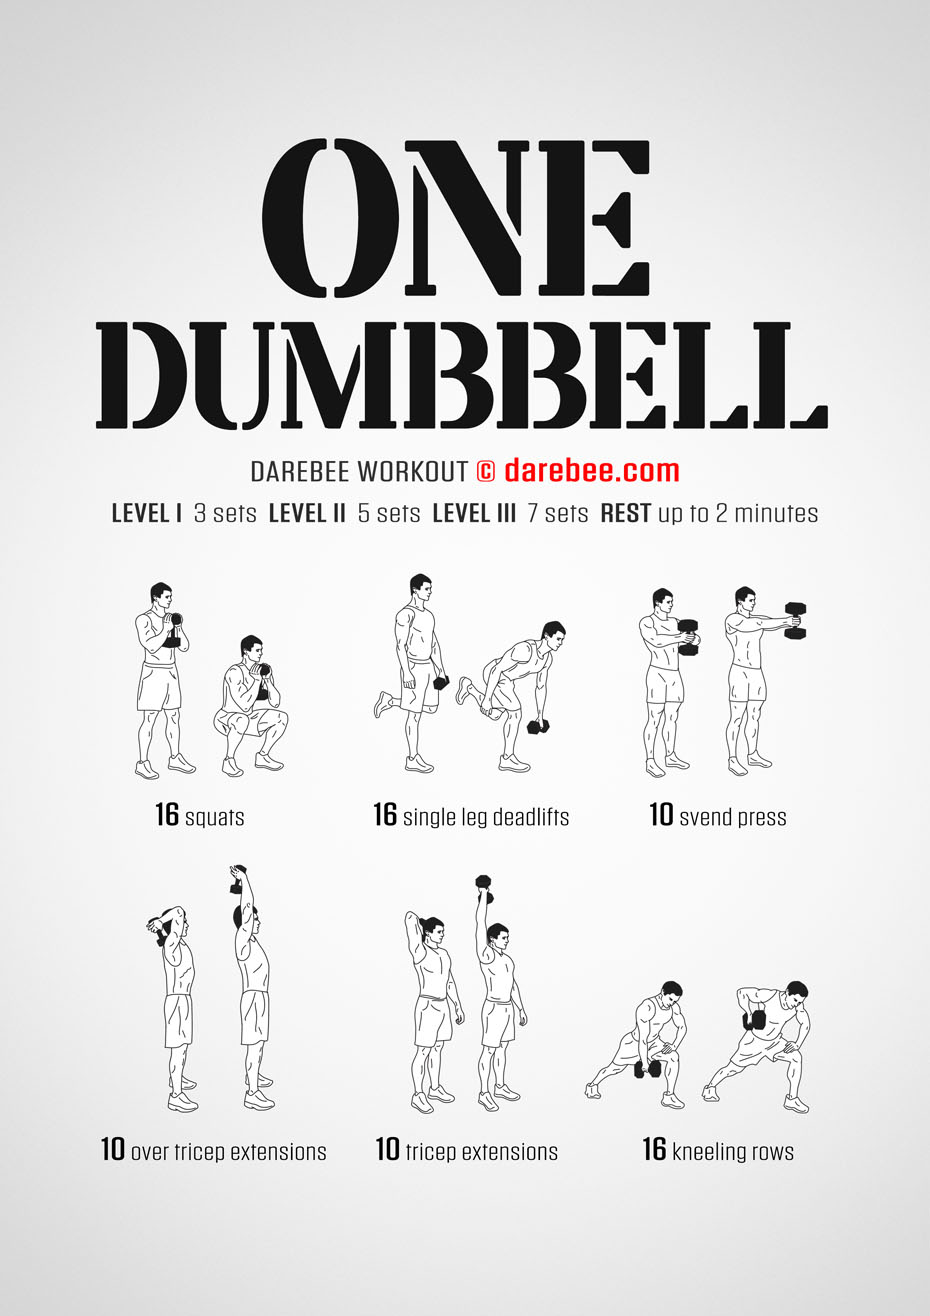 One Dumbbell is a Darebee home-fitness total body strength workout that needs next to no space to do. 